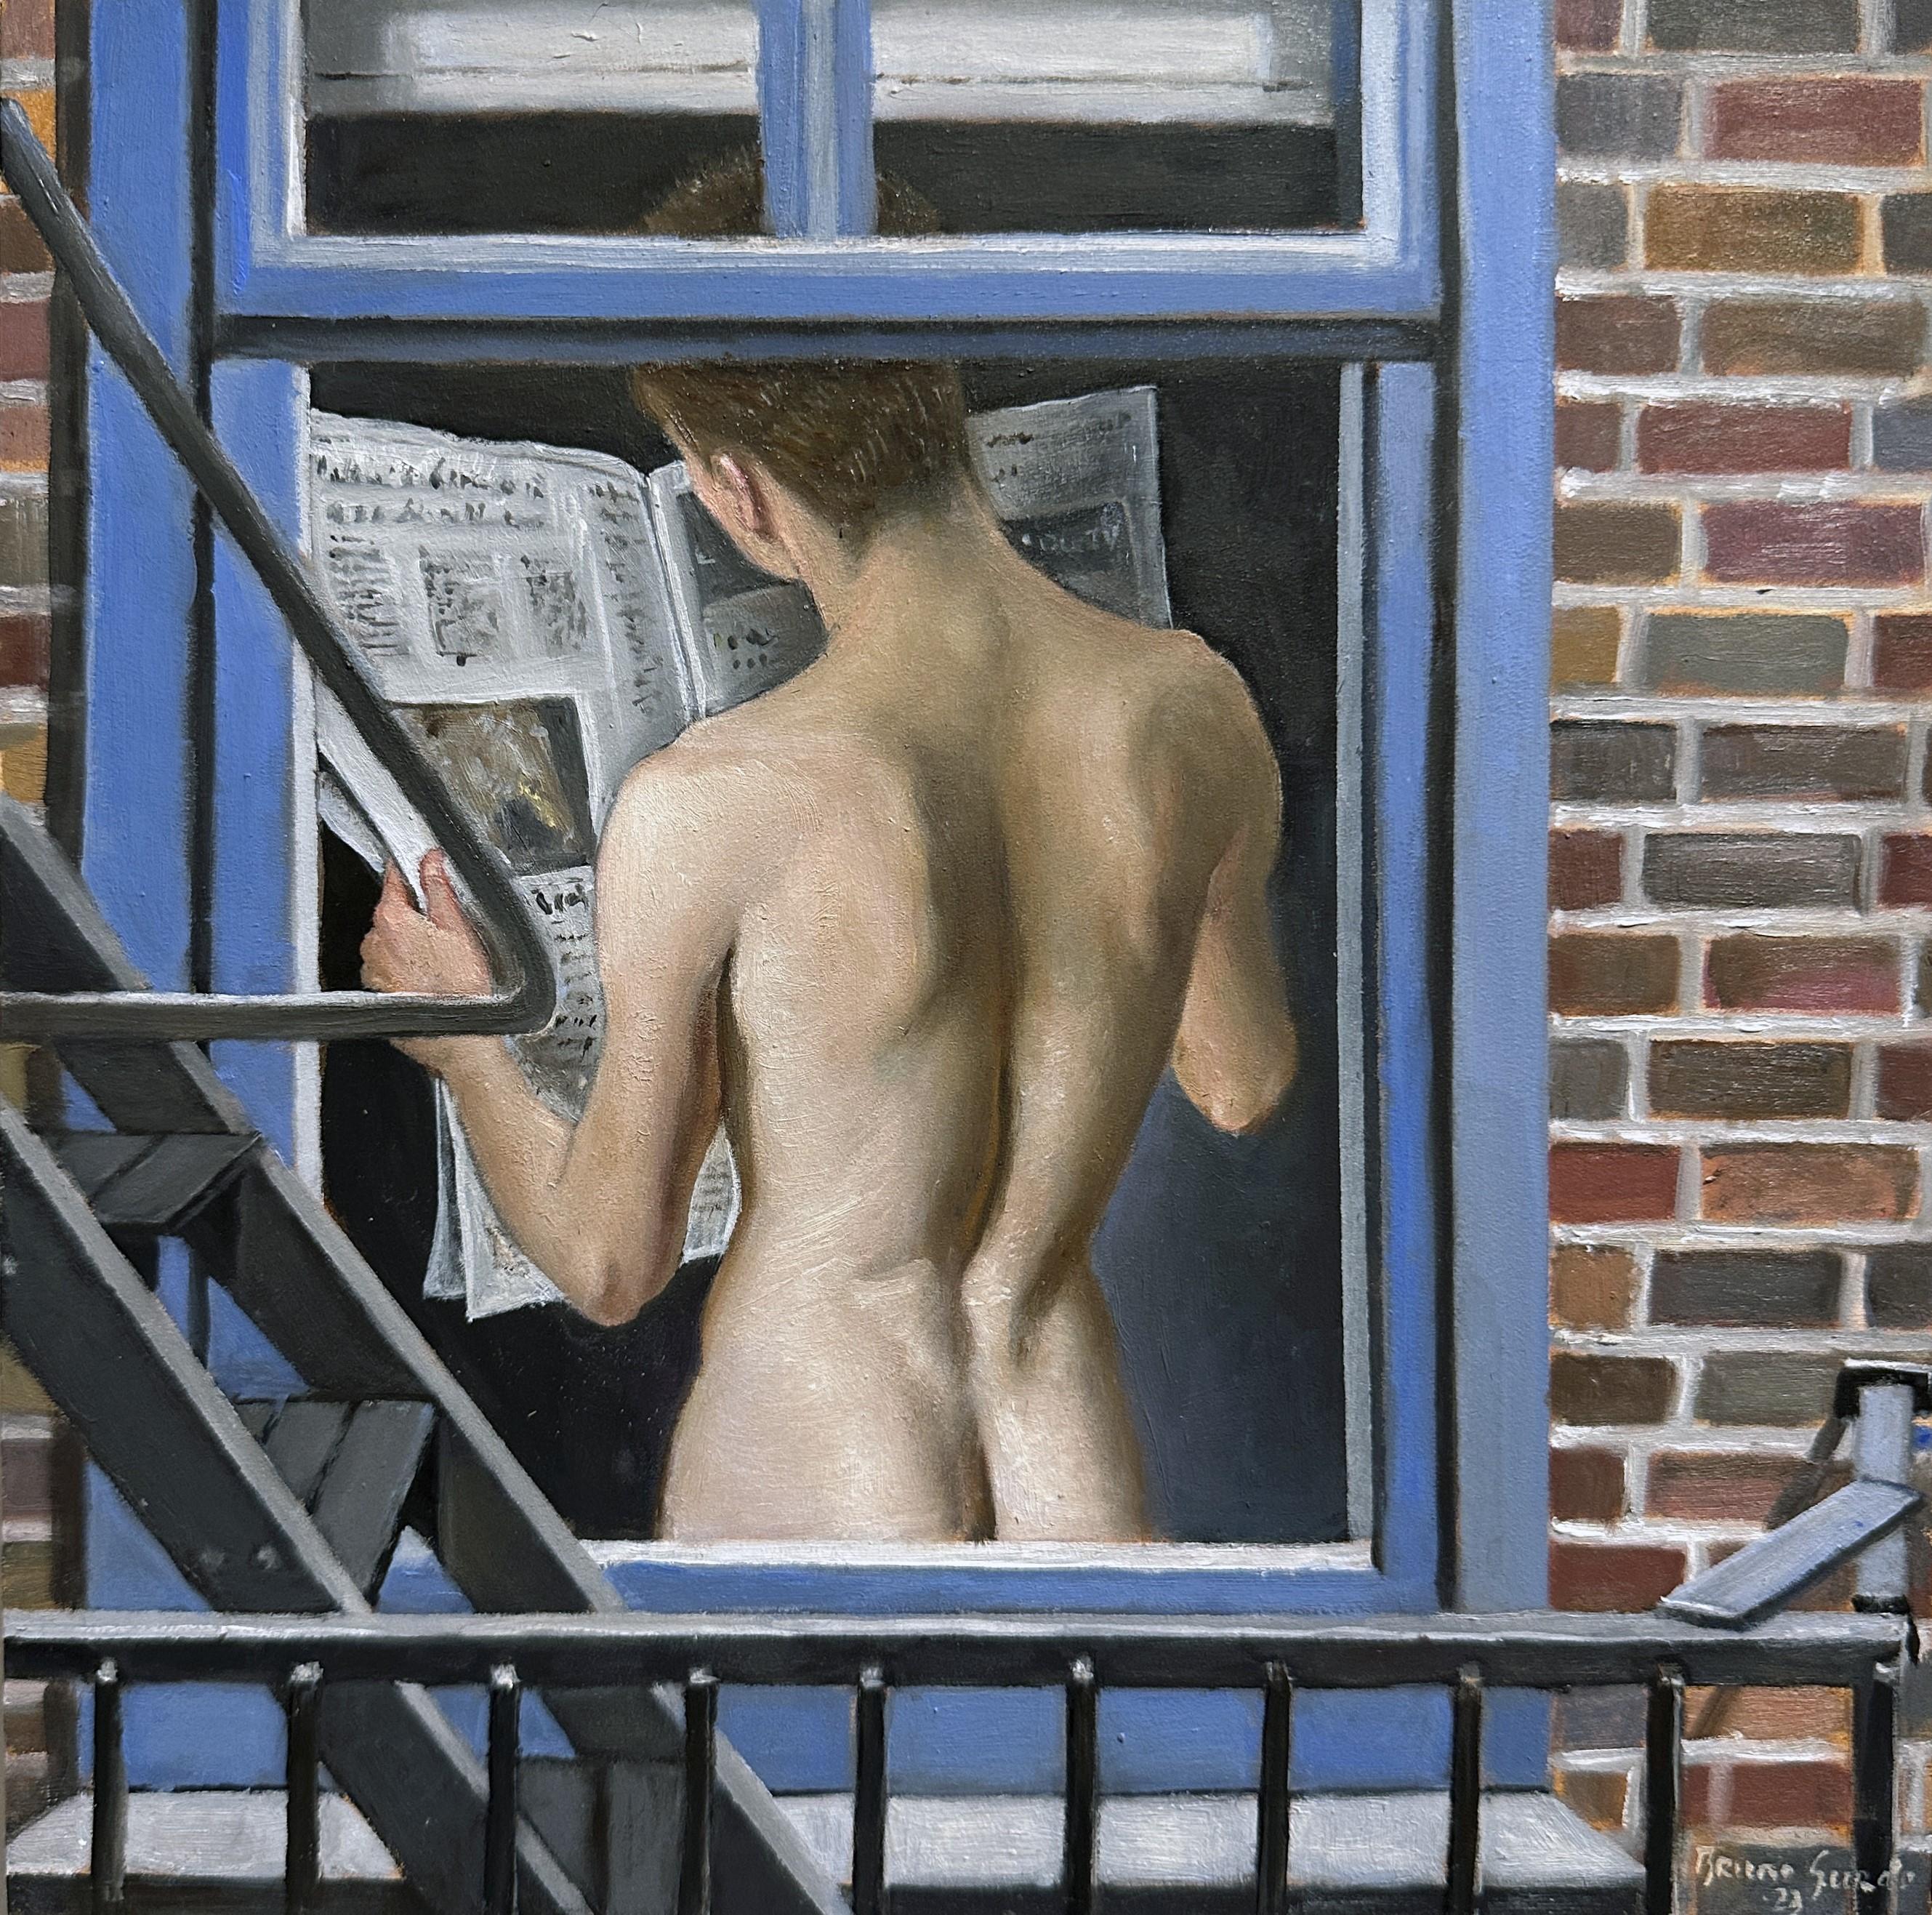 Bruno Surdo Nude Painting - Morning News - Voyeuristic View of Nude Male Torso Through the Fire Escape 